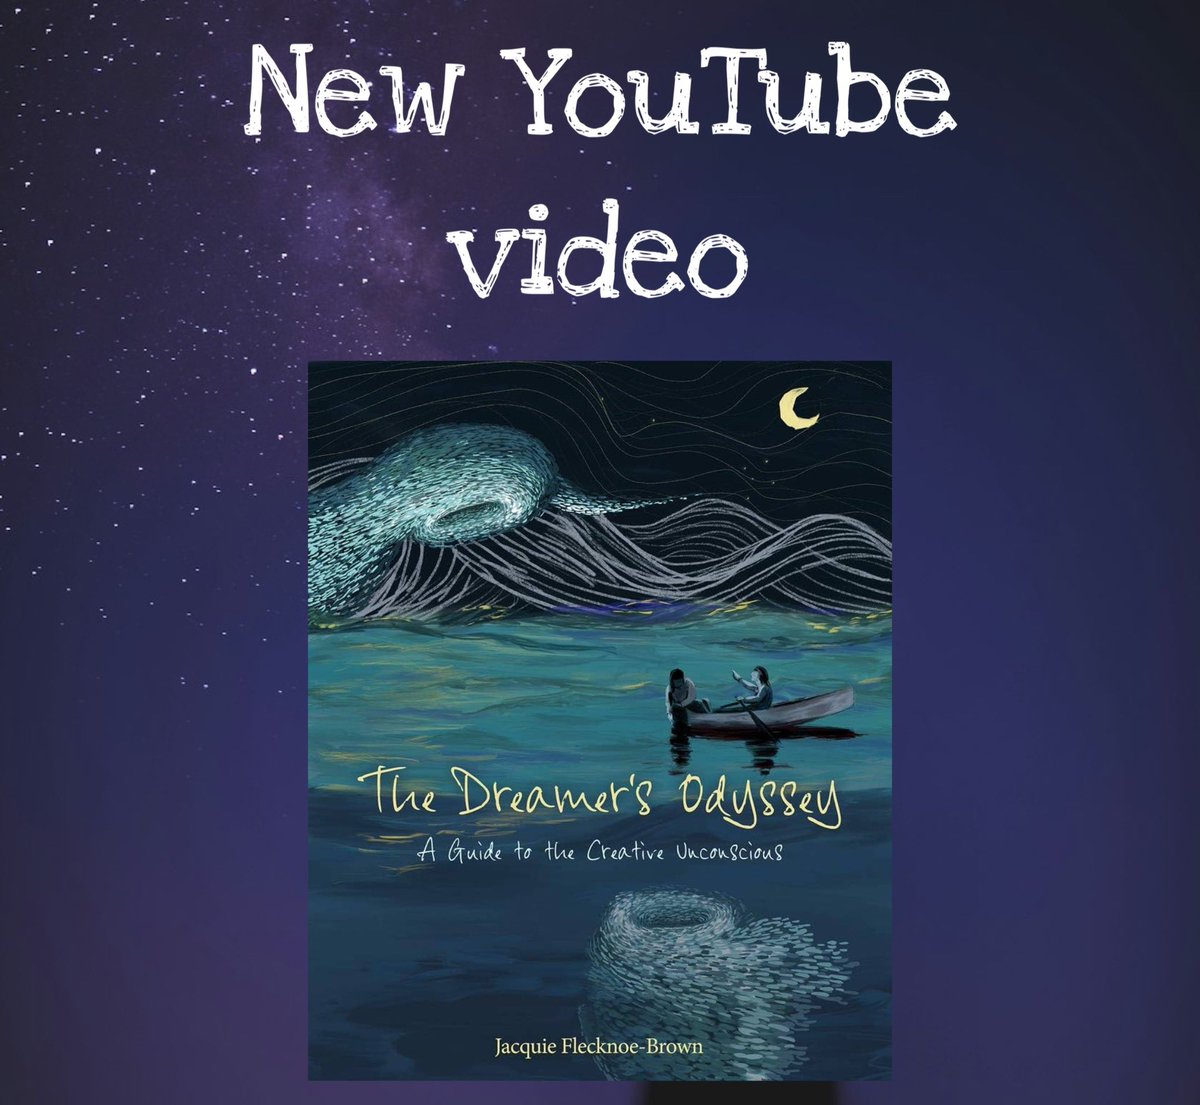 Book Tour Review: The Dreamers Odyssey
youtu.be/s_igyNJE-nU

#LiterallyPR #BookReview #TheDreamersOdyssey #JacquieFlecknoeBrown #AGuide #Youtube #VideoReview